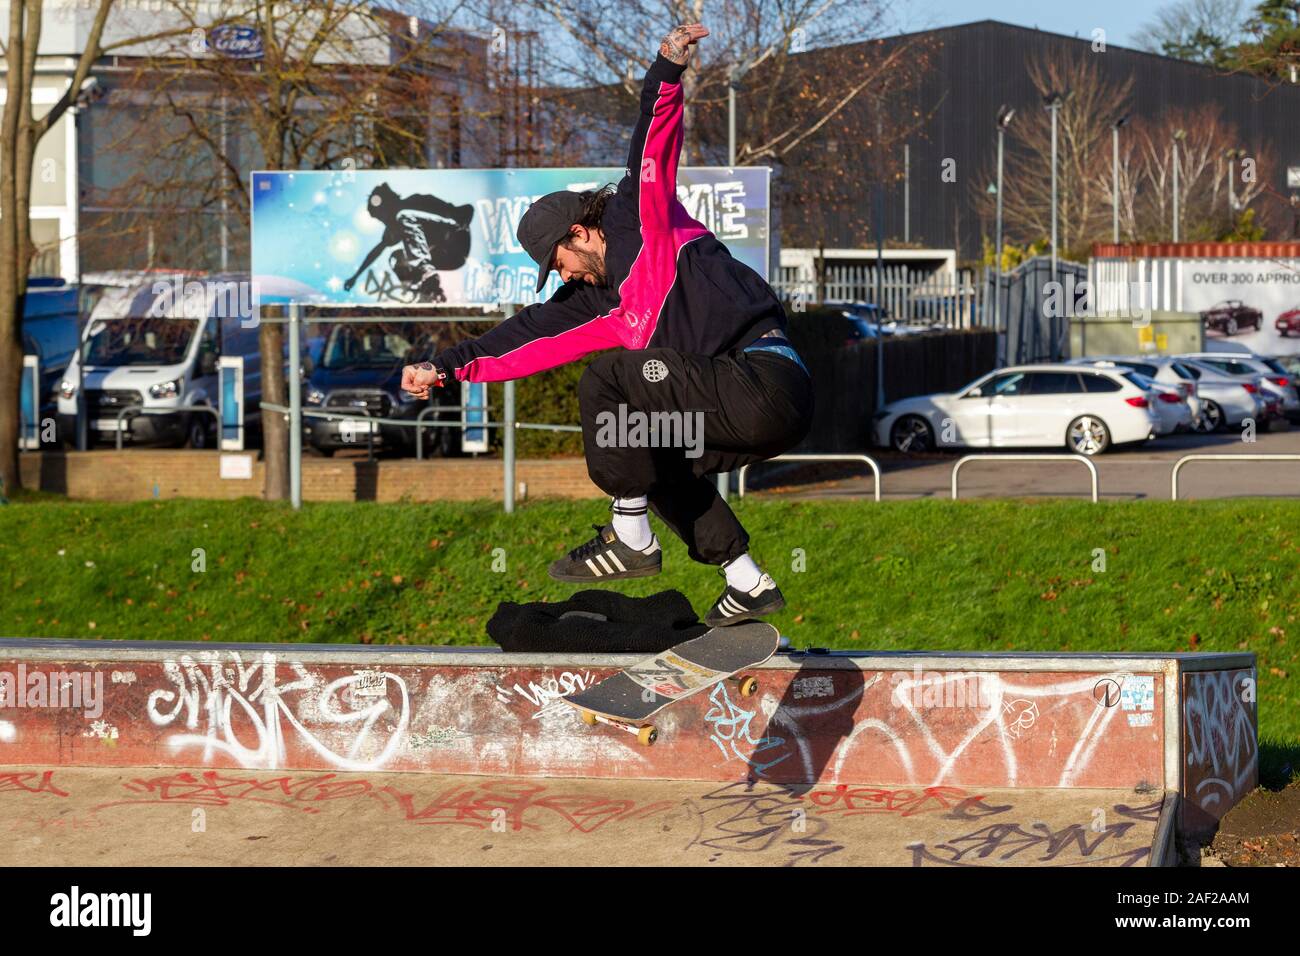 Young man boarding at Radlands Skate Park, Mid Summer Meadow, Northampton, UK. Stock Photo